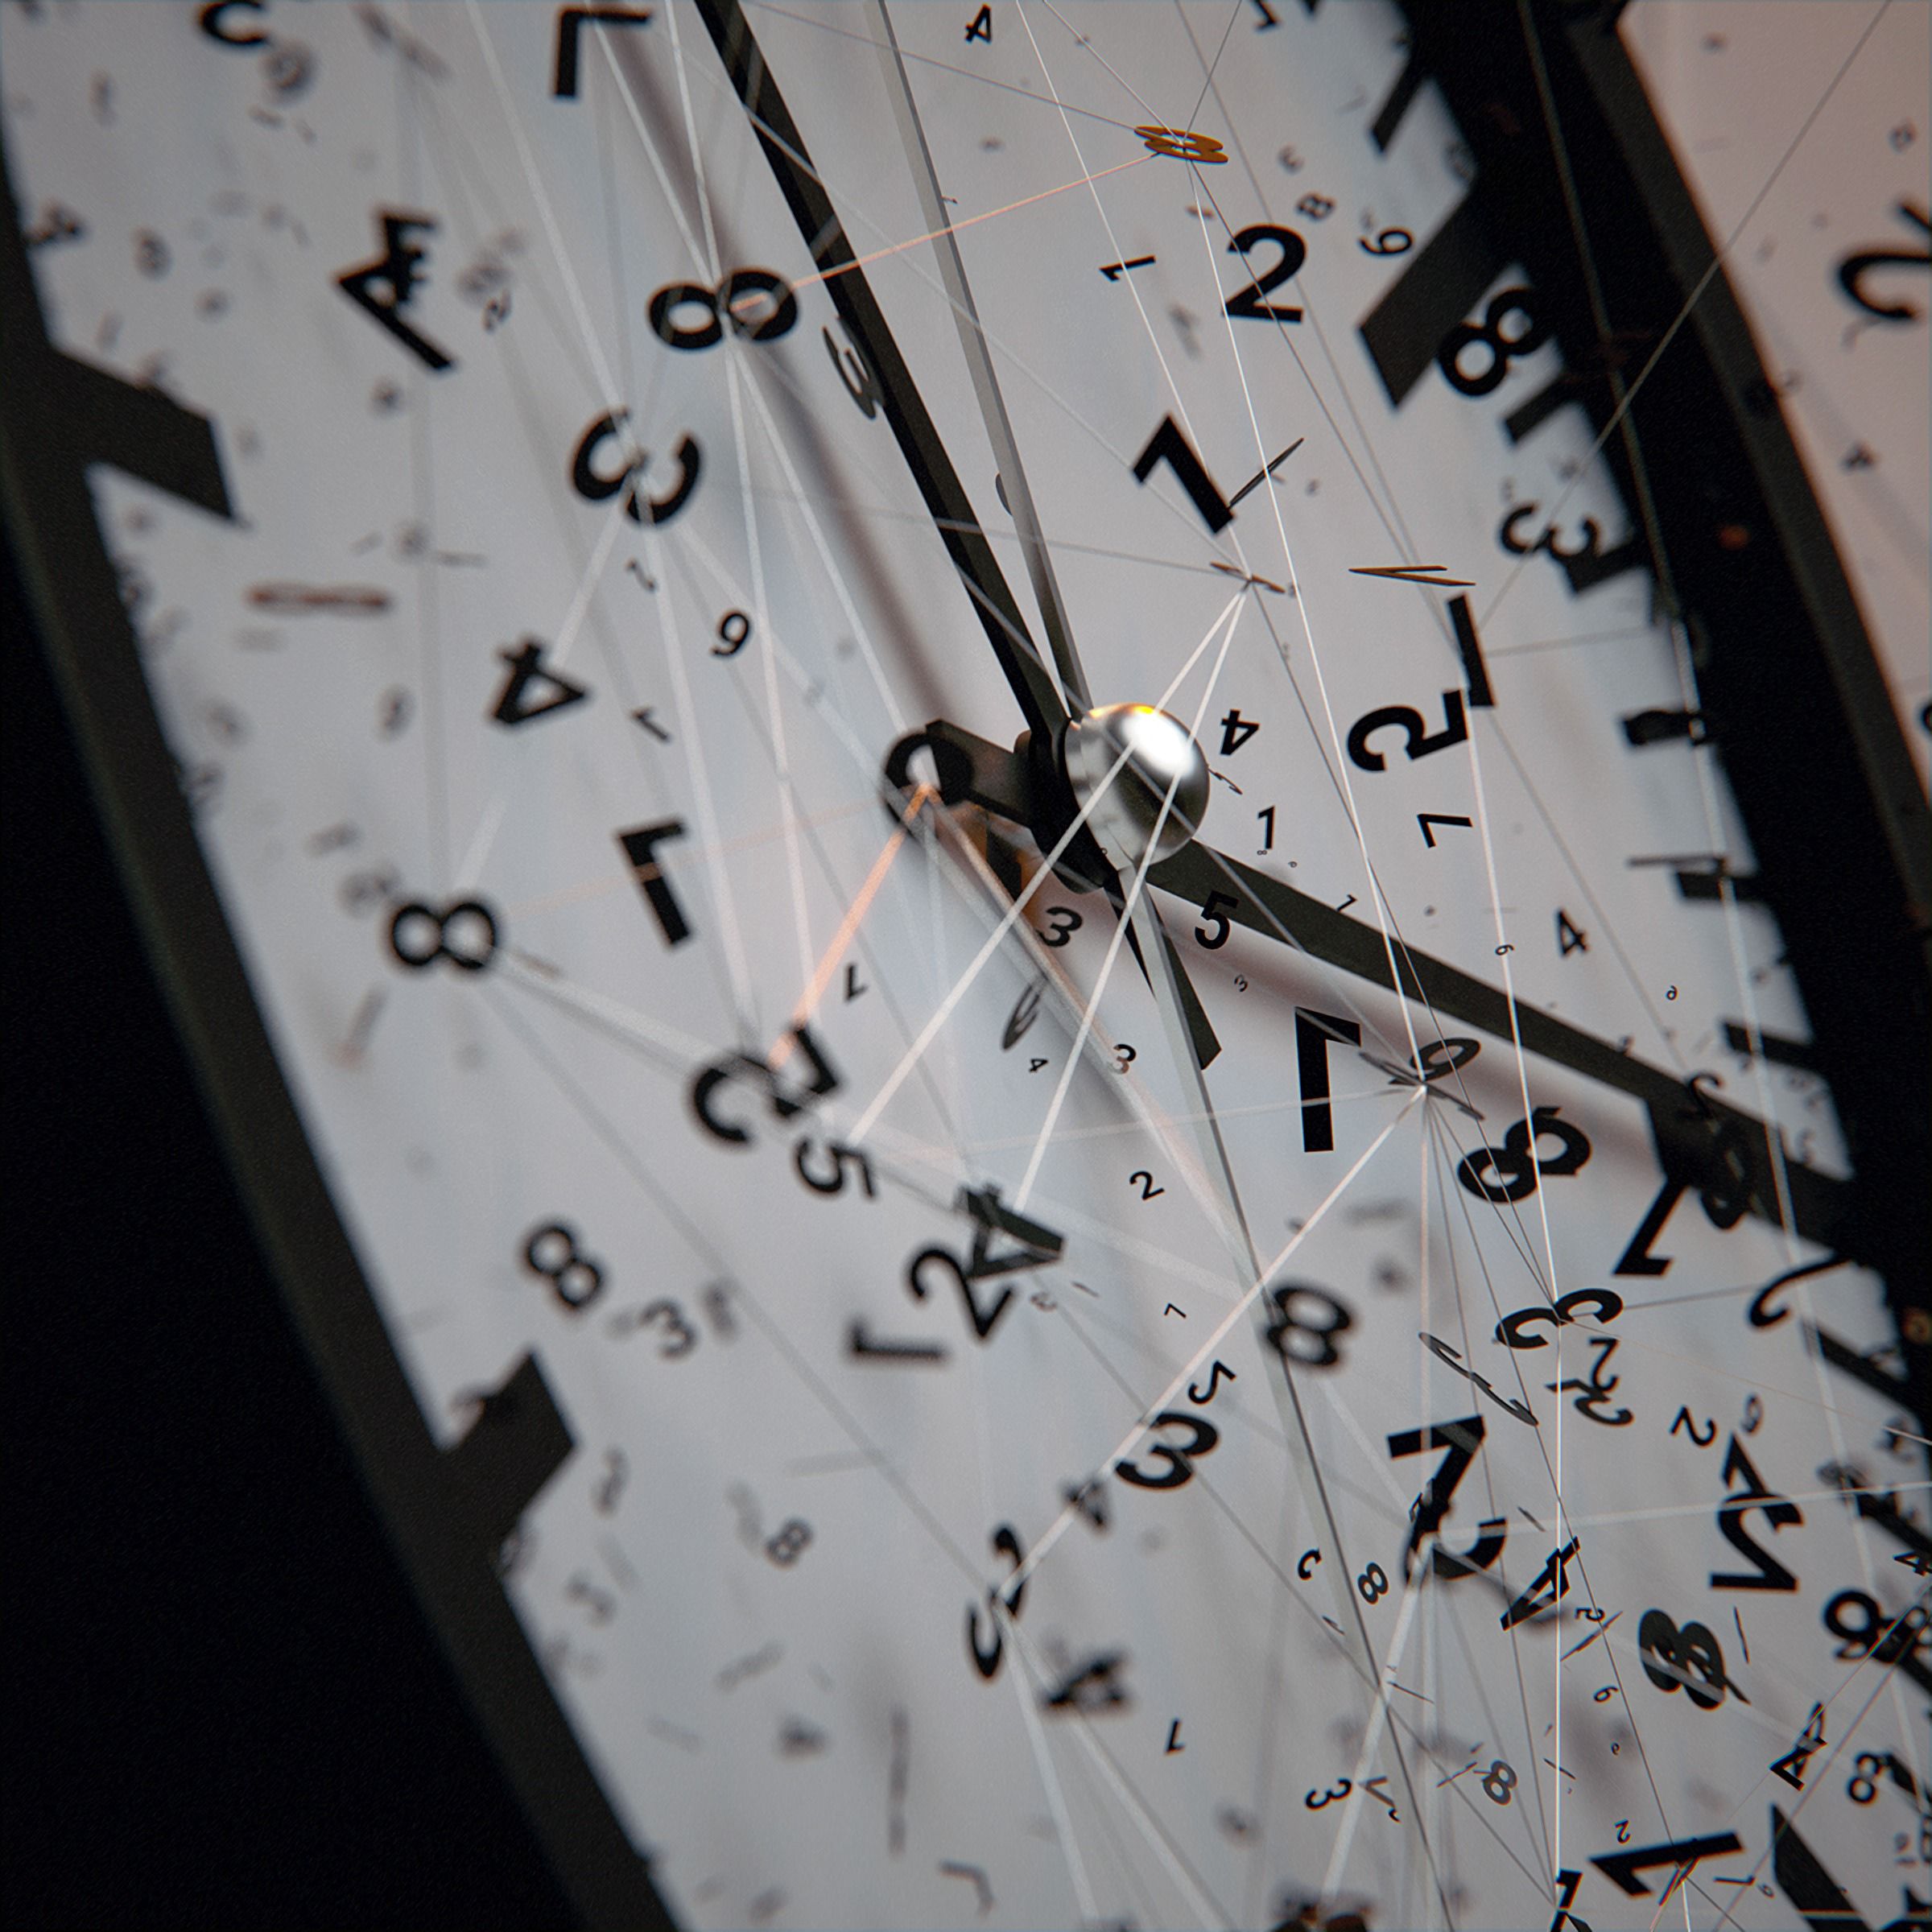 miscellanea, numbers, clock face, clock, dial, intricate, miscellaneous, lines, confused, arrows Full HD